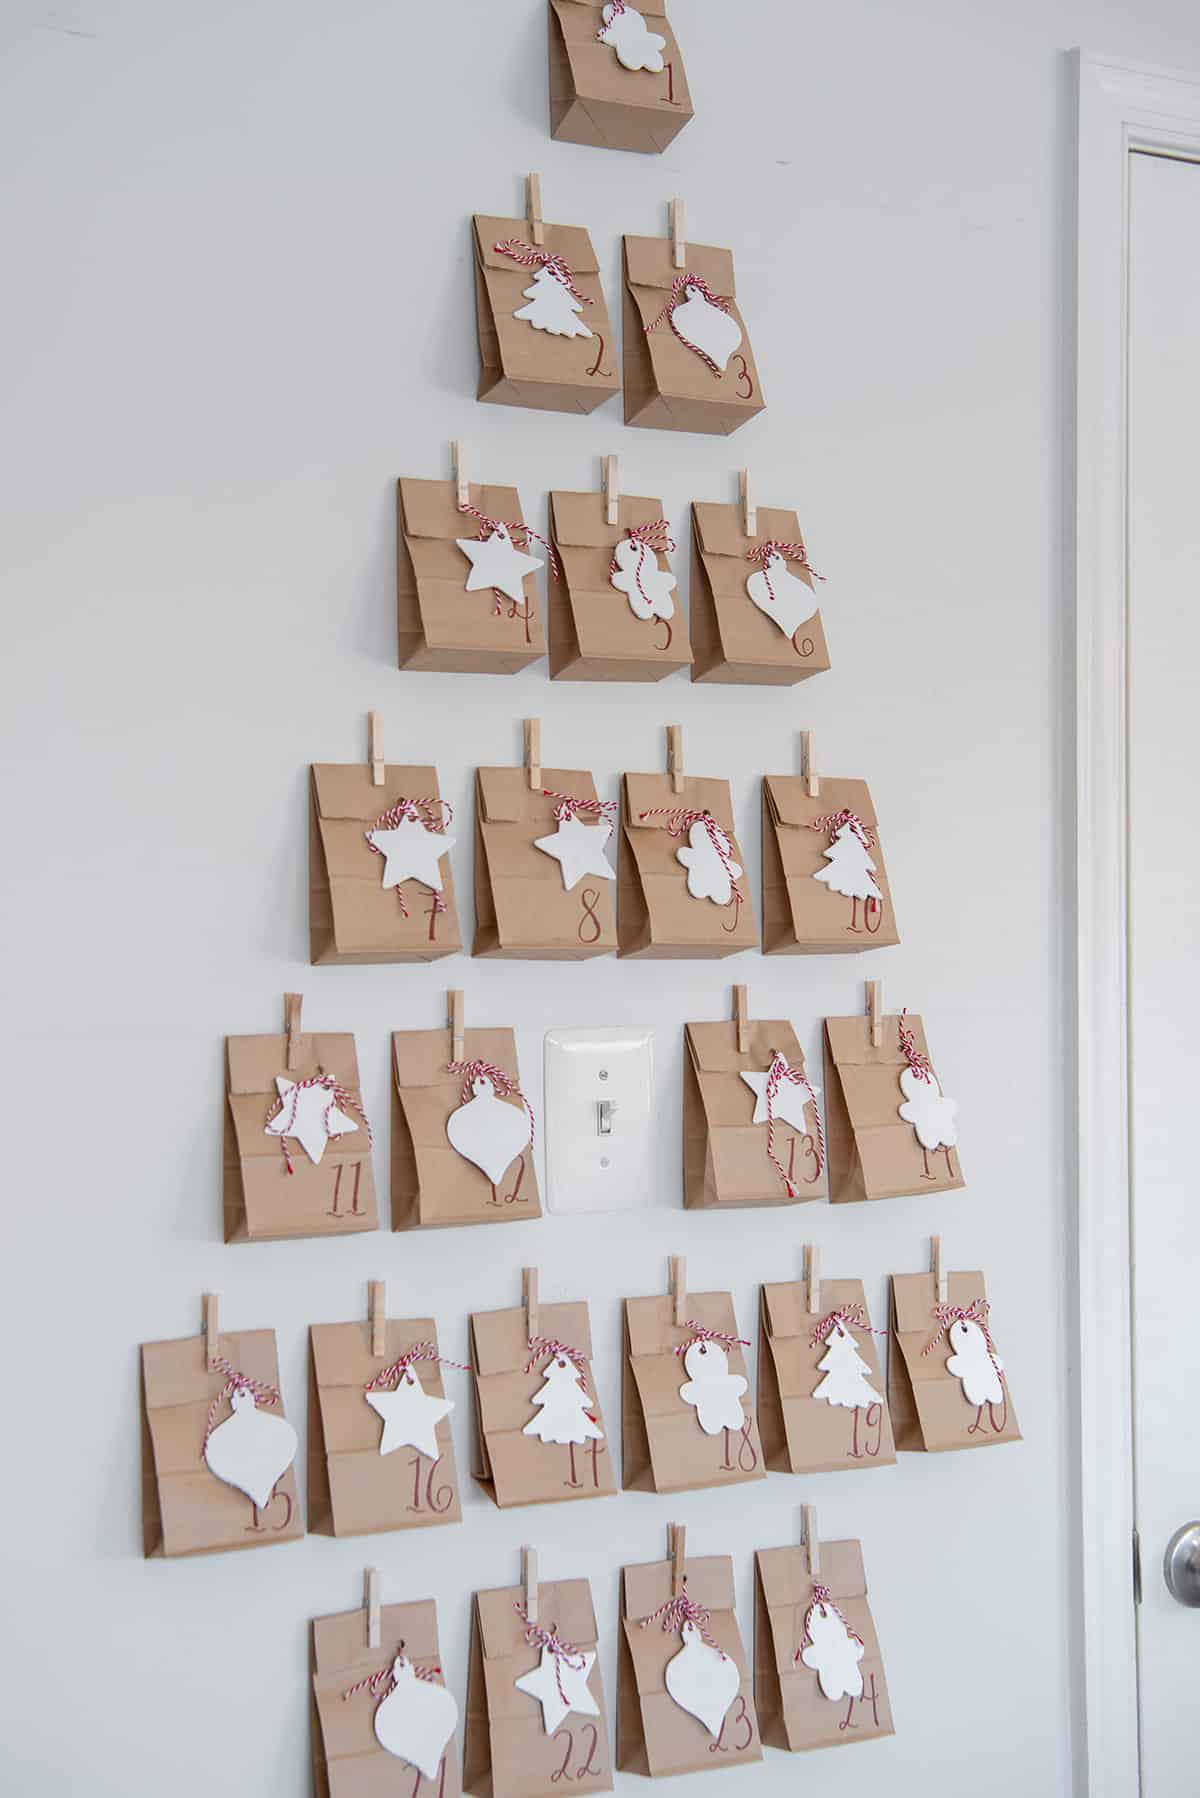 Paper bag advent calendar hung on the wall with a light switch in the center.